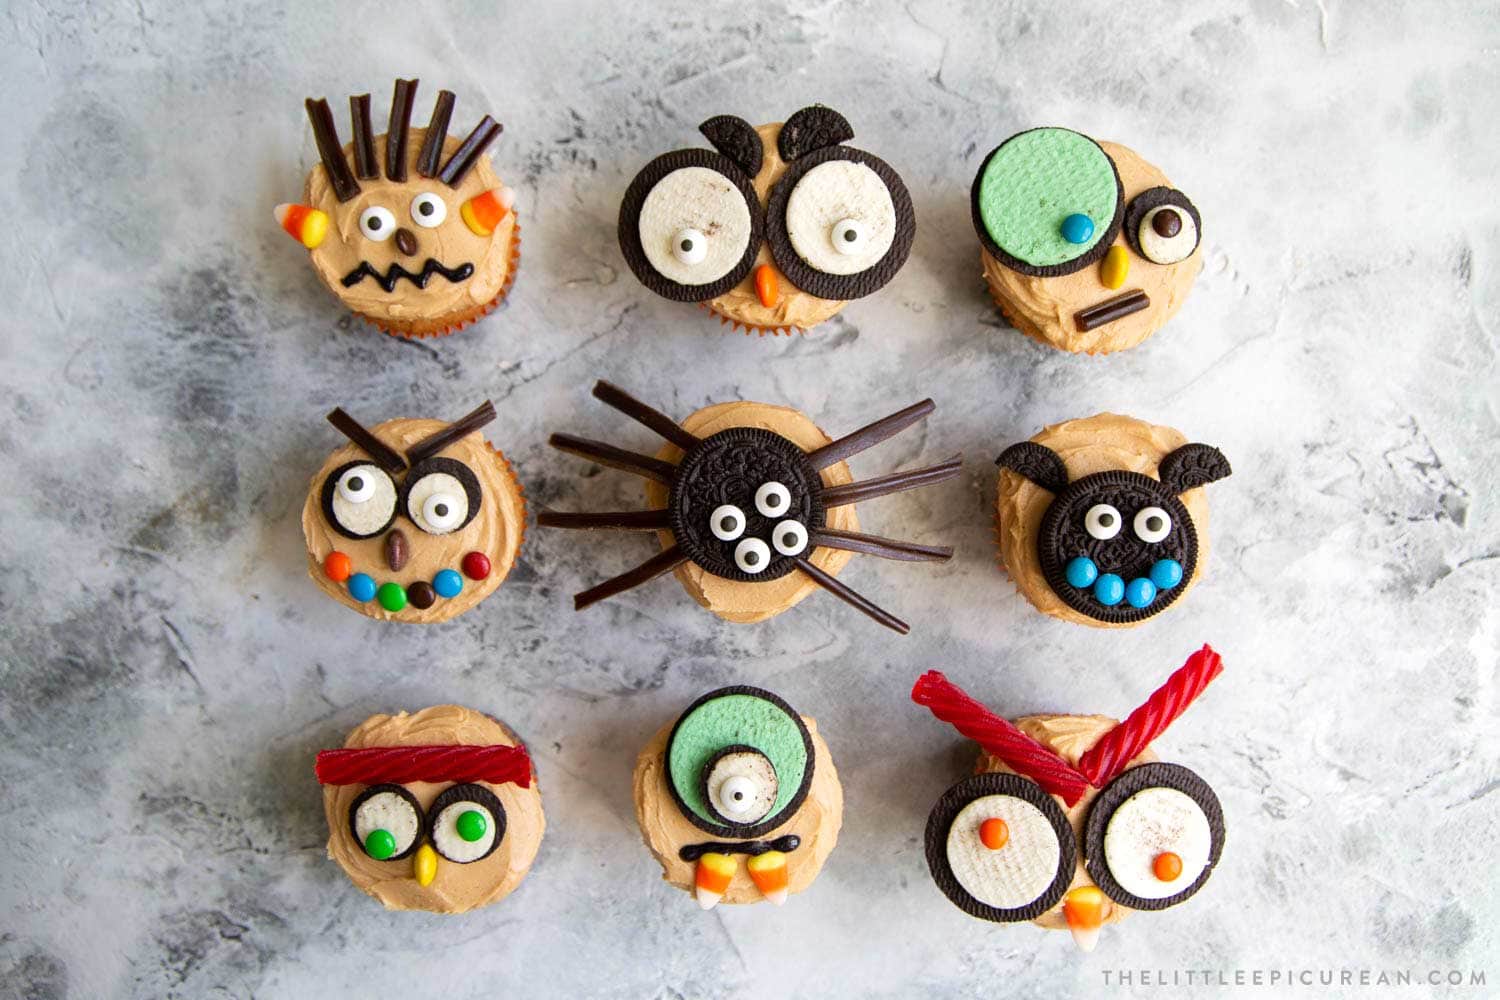 Easy to decorate Halloween cupcakes using a variety of store-bought cookies and candies. Use your favorite cupcake recipe, or try the peanut butter cupcakes with peanut butter frosting in this post.